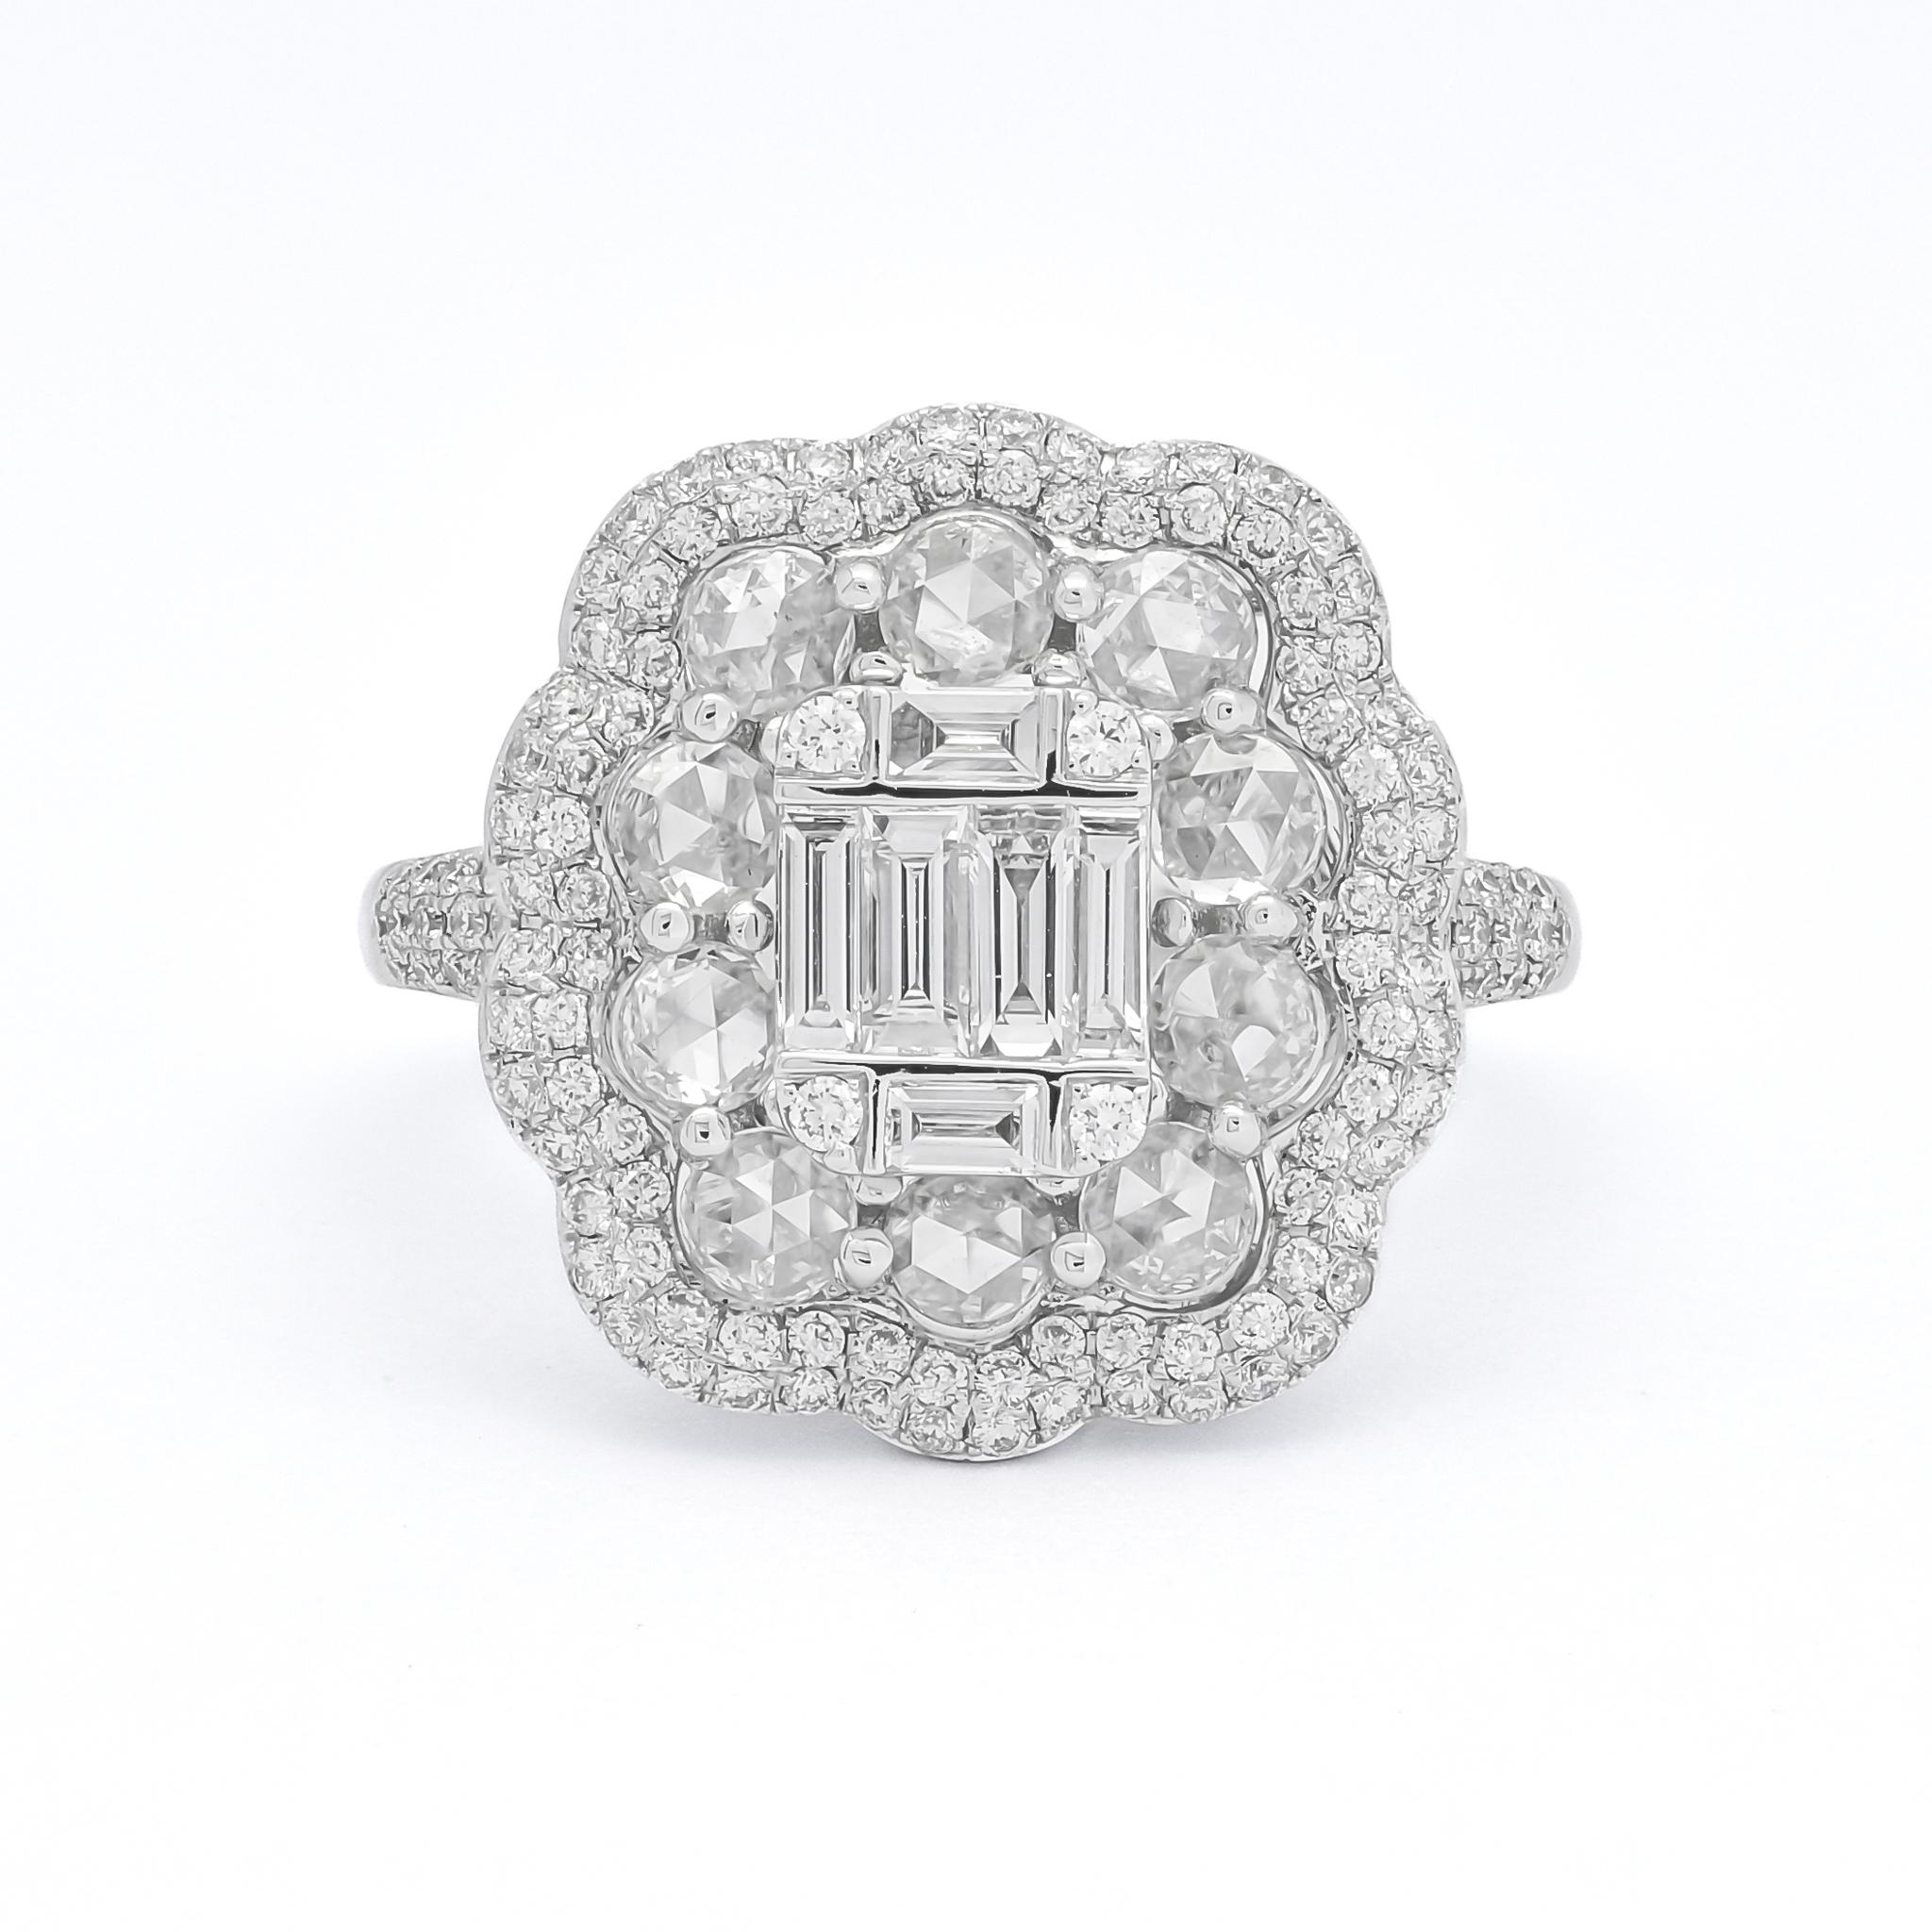 The brilliance of the baguette diamonds, meticulously arranged in a captivating cluster, is further accentuated by the delicate silhouette of the briolette, creating a visual masterpiece that captures the essence of opulence.

Introducing a timeless